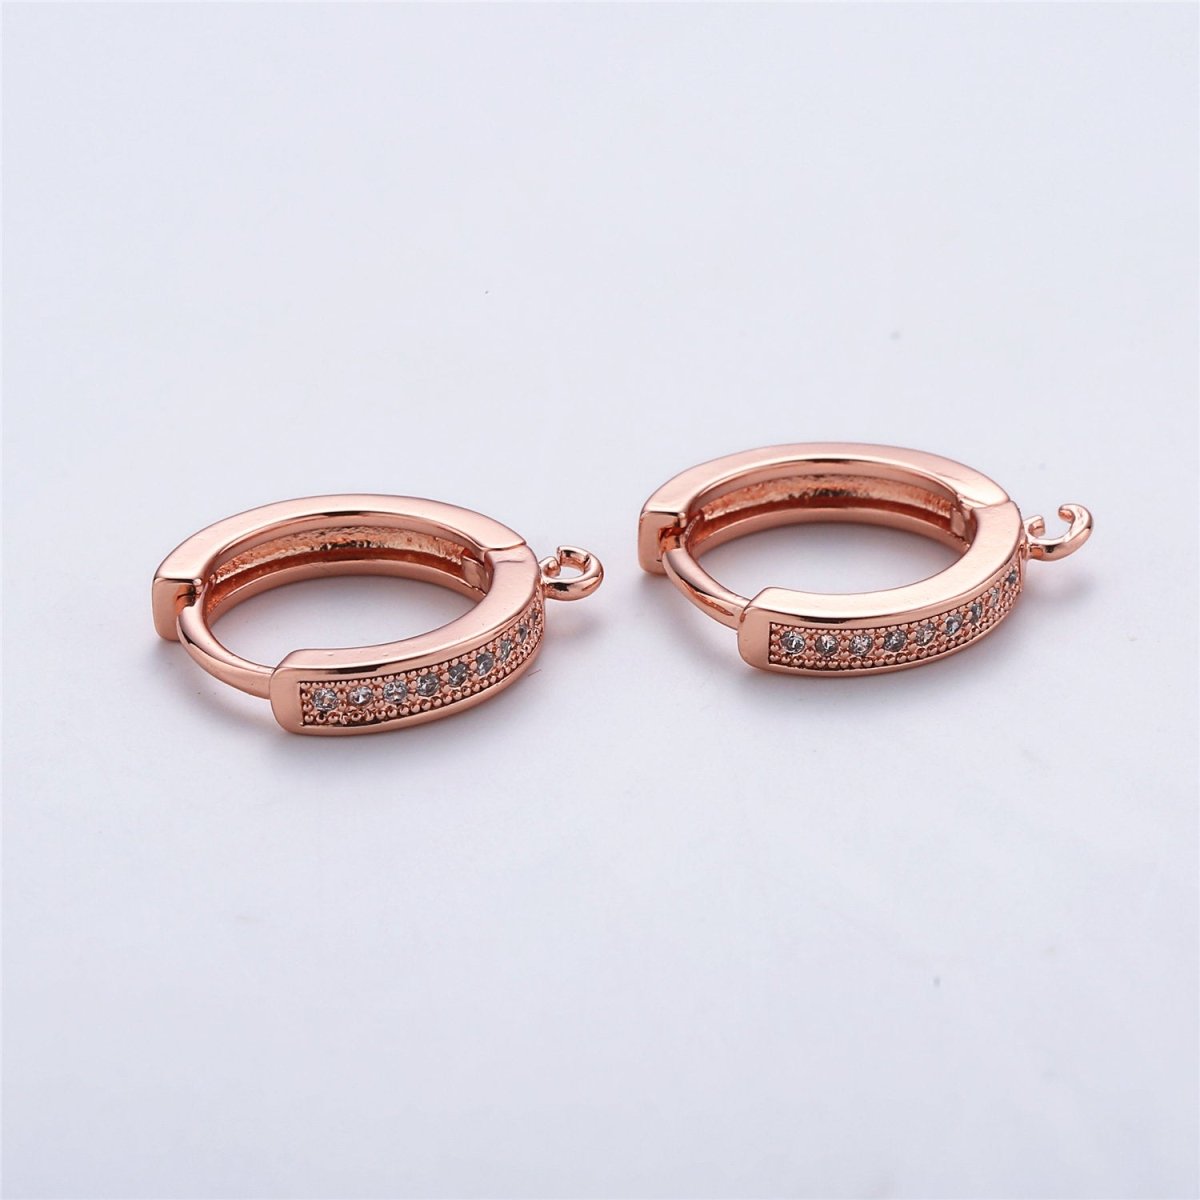 18k Gold Filled Earring One Touch Earring, jewelry Making, 15mm Gold huggie hoop earring with Micro Pave CZ Dainty Earring Charm K-161 K-162 L-331 L-332 - DLUXCA